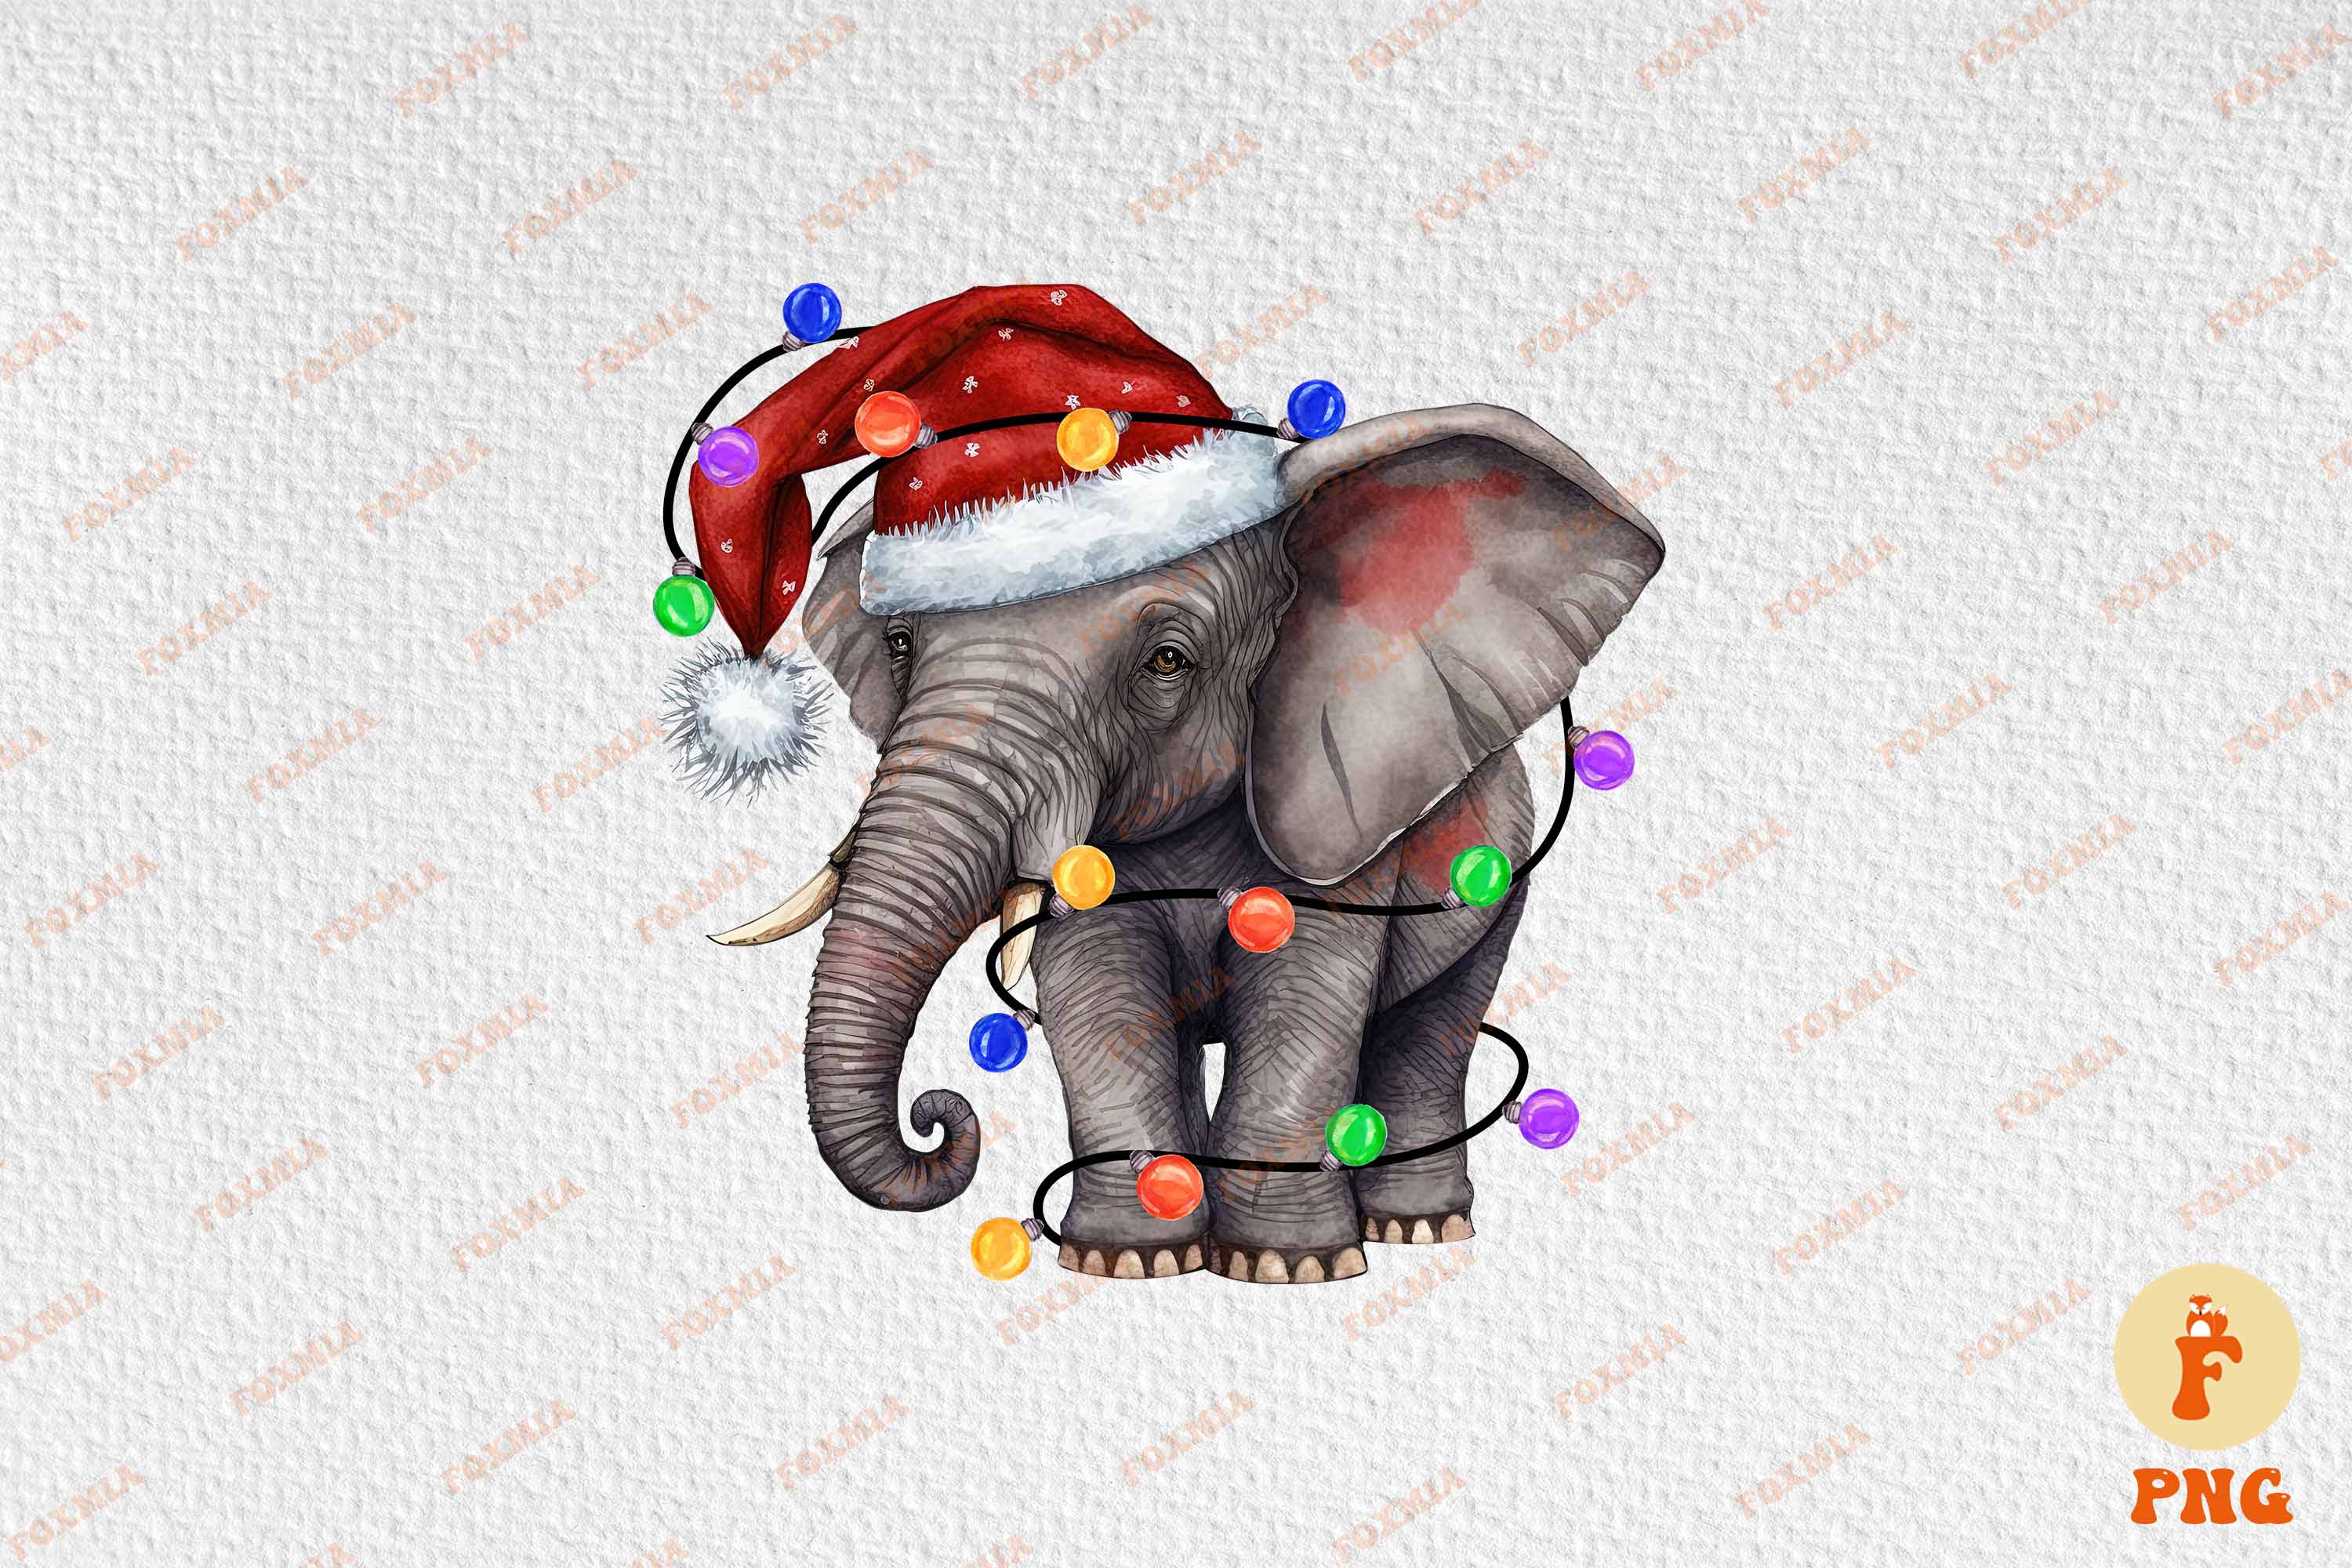 Irresistible image of an elephant in a santa hat.